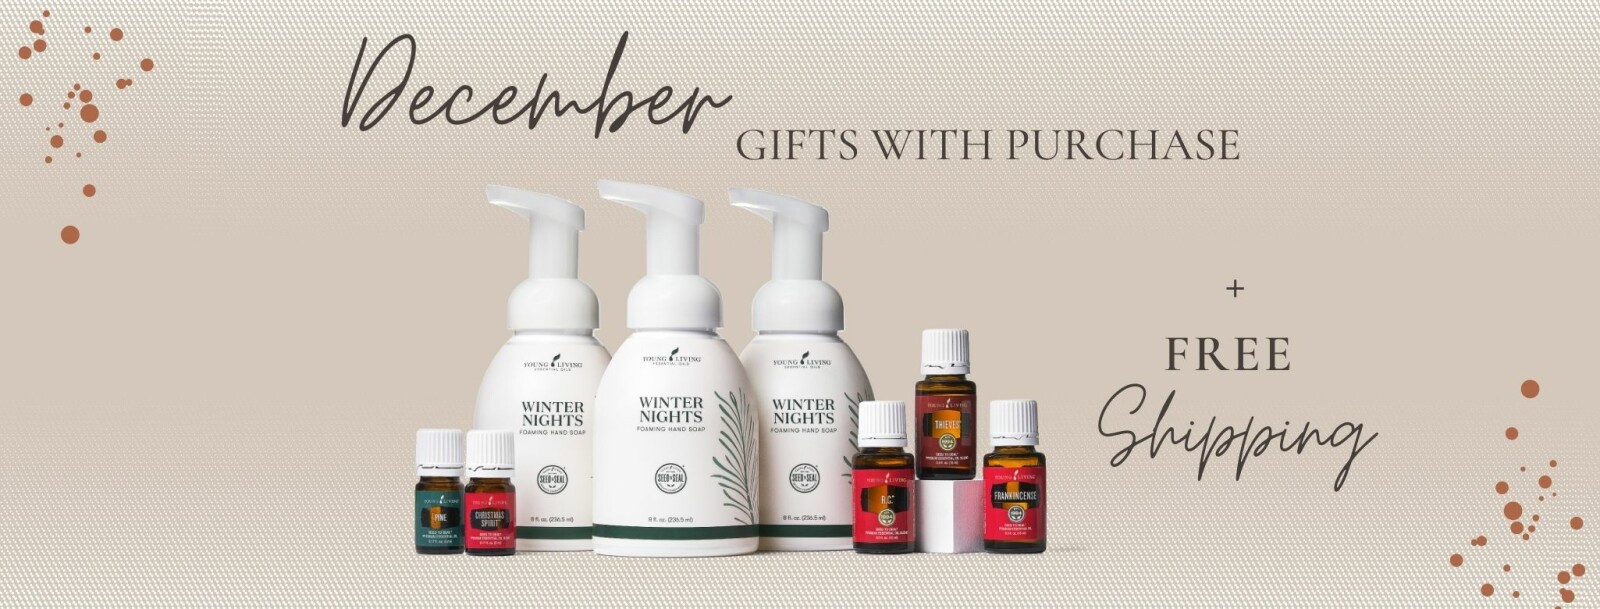 Young Living December Gifts with Purchase